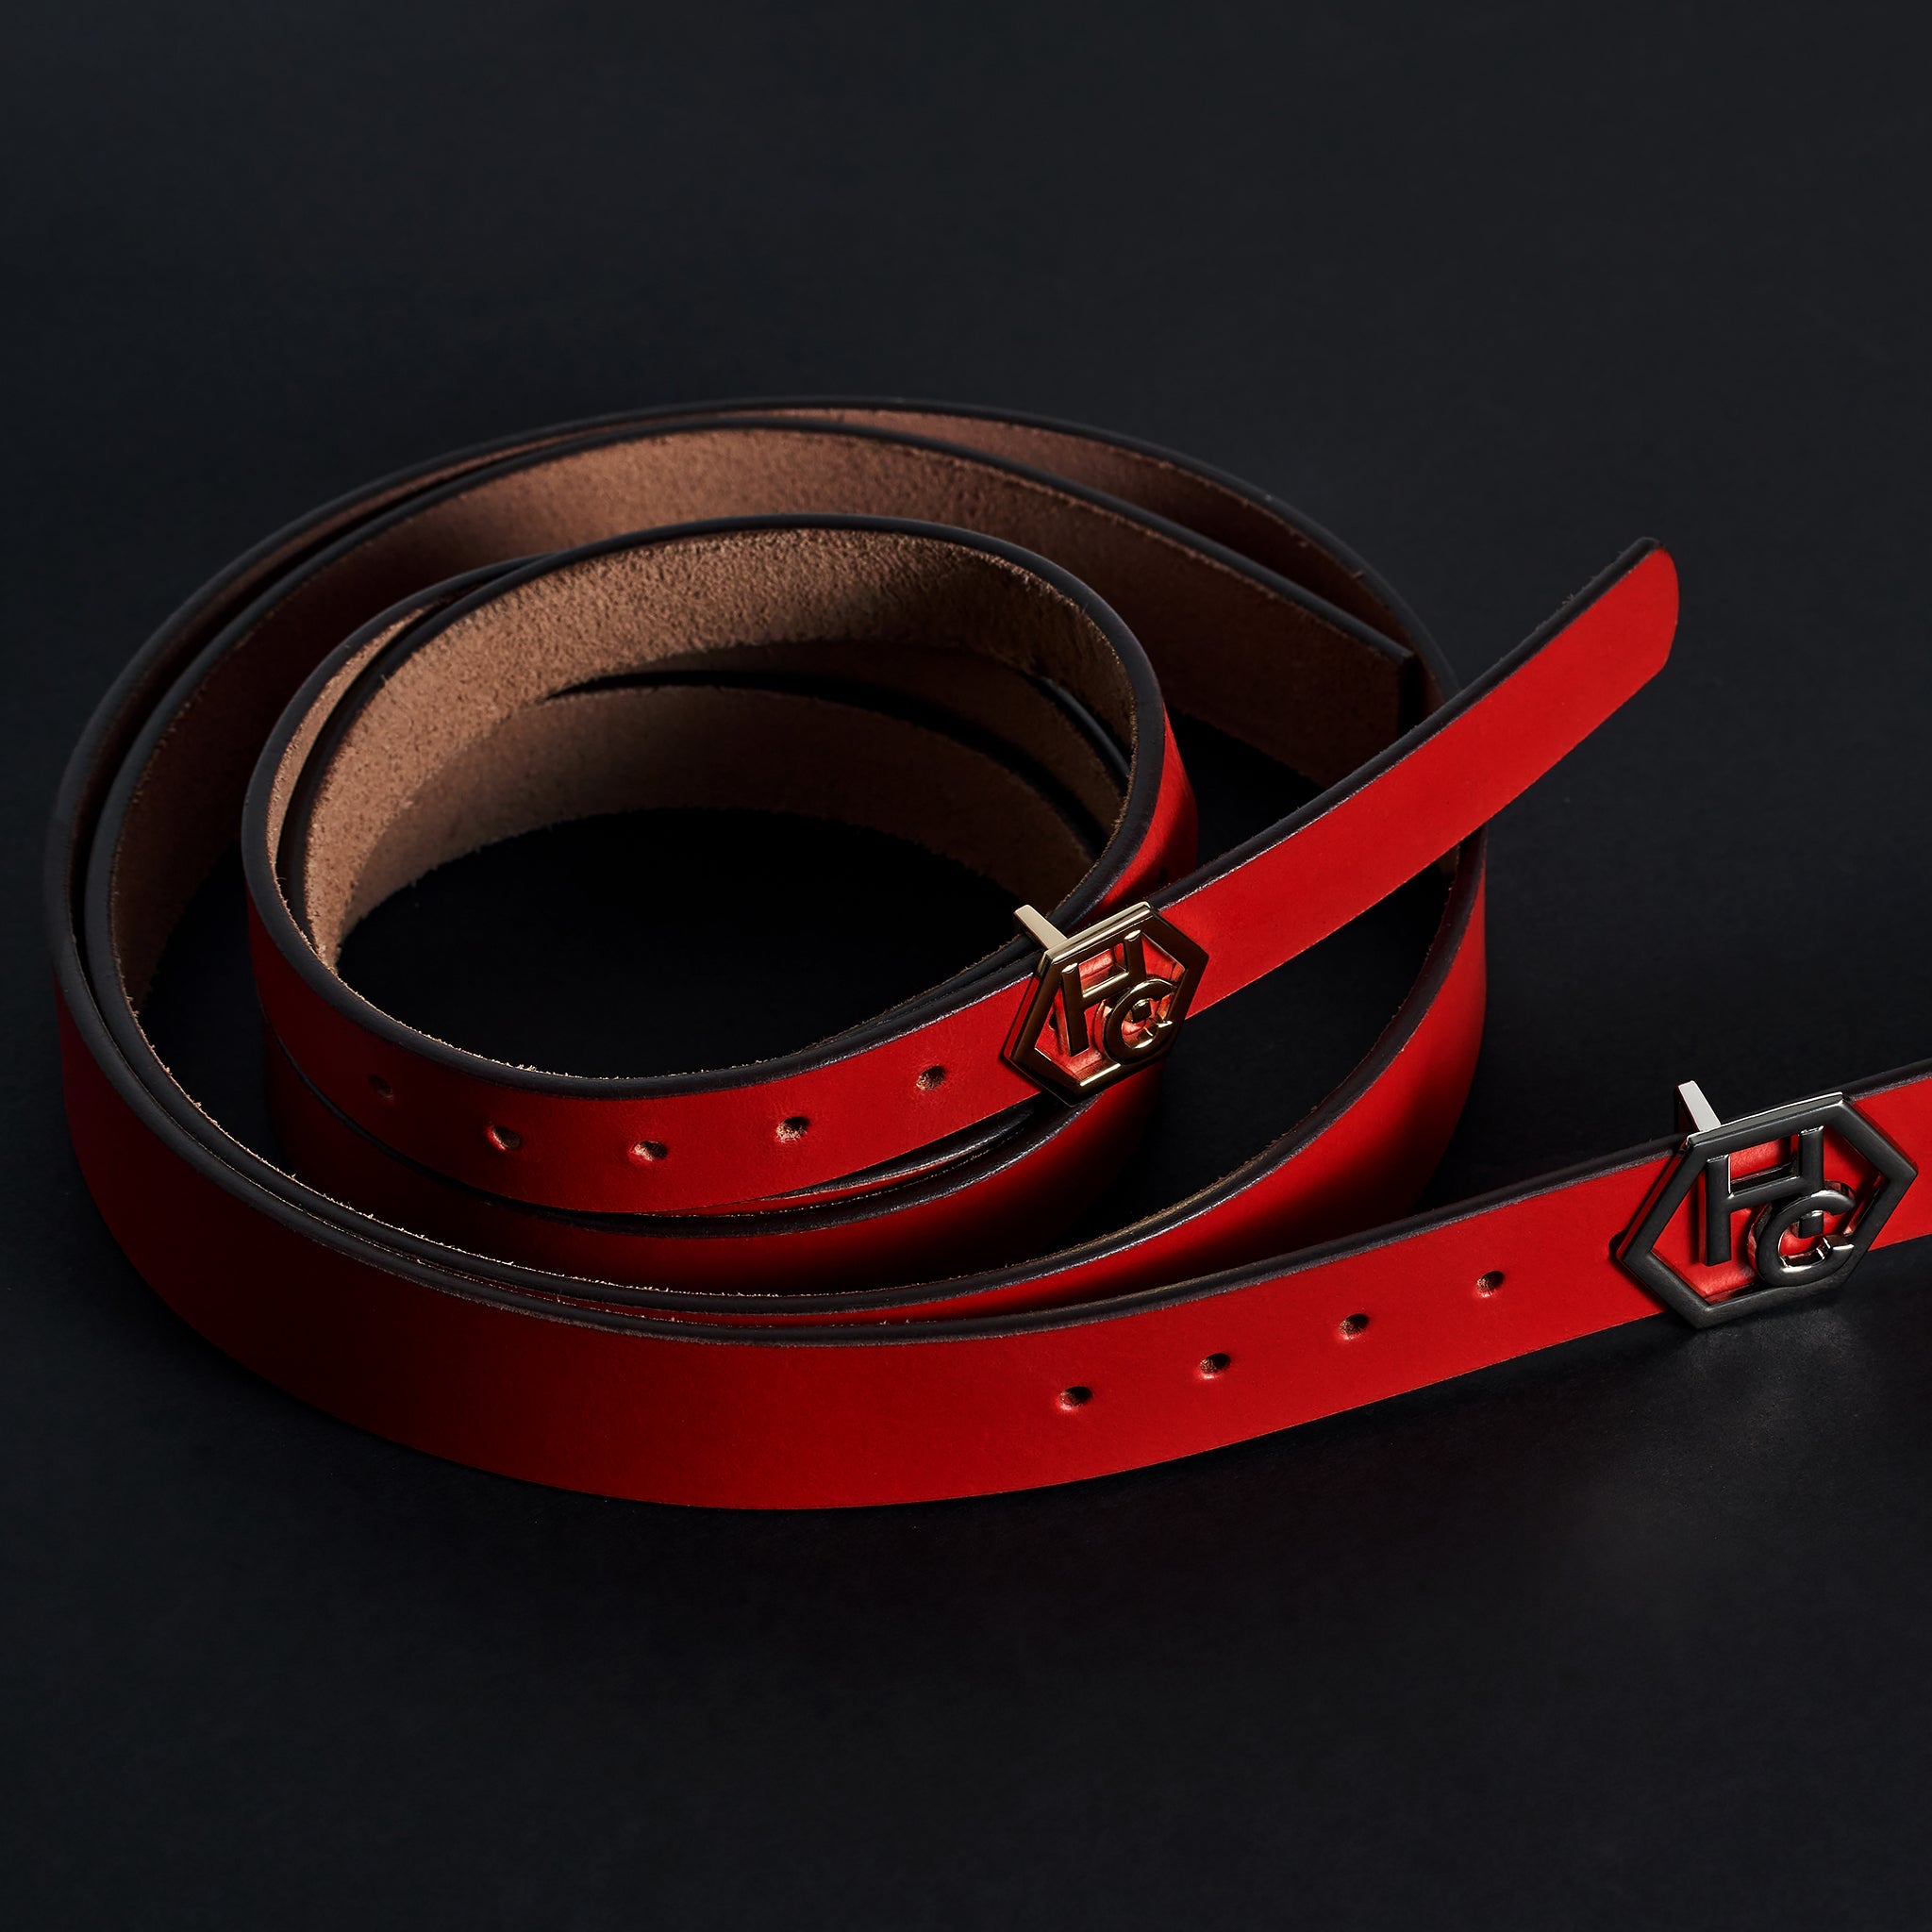 Hedonist Chicago Seamless Red Leather Belt 1" 32381330817175